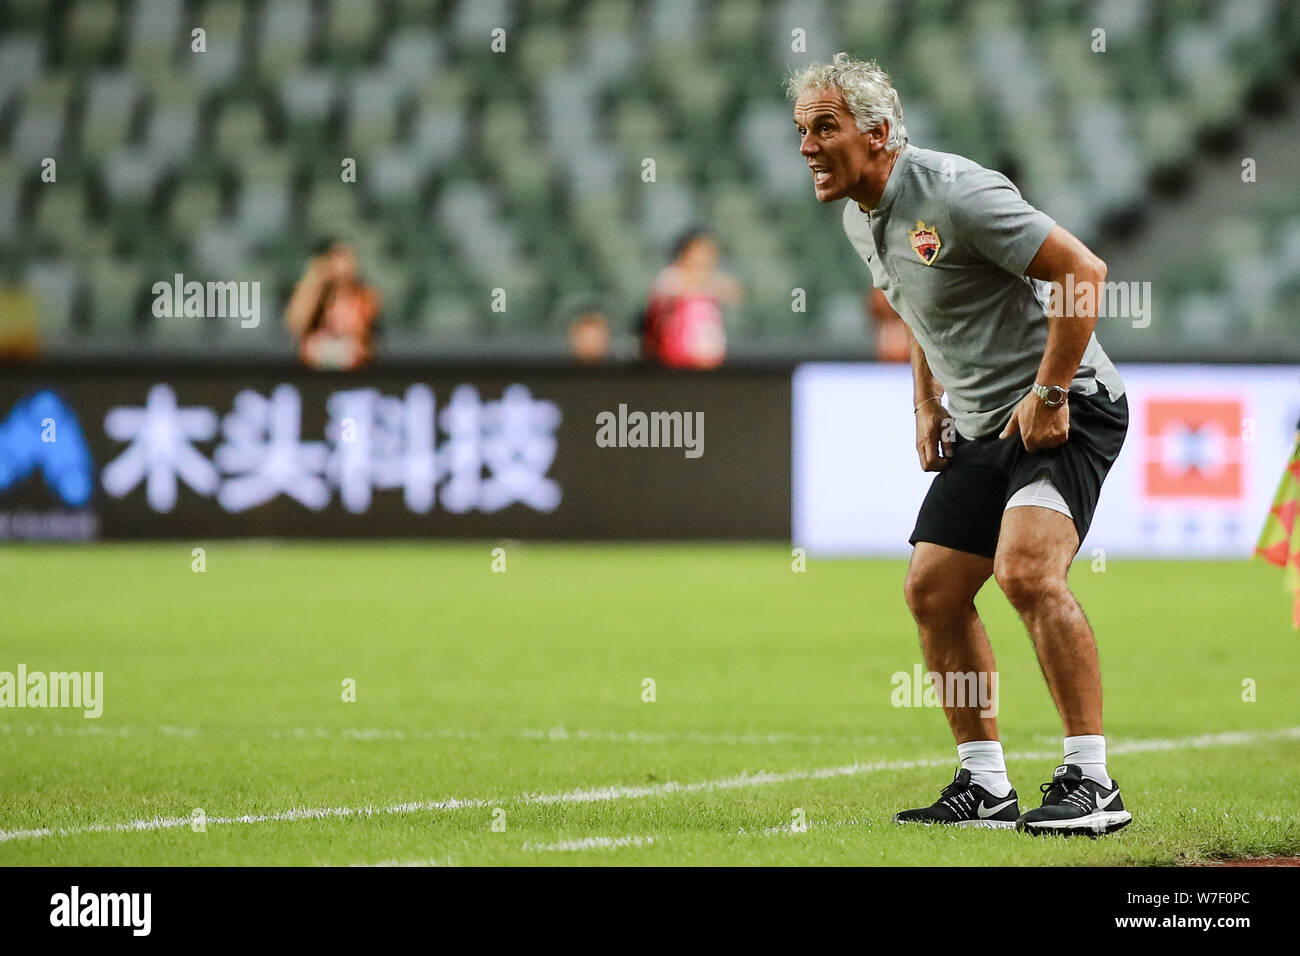 Head coach Roberto Donadoni of Shenzhen F.C. reacts as he watches his players competing against Beijing Renhe in their 21st round match during the 2019 Chinese Football Association Super League (CSL) in Shenzhen city, south China's Guangdong province, 2 August 2019. Shenzhen F.C. played draw to Beijing Renhe 1-1. Stock Photo